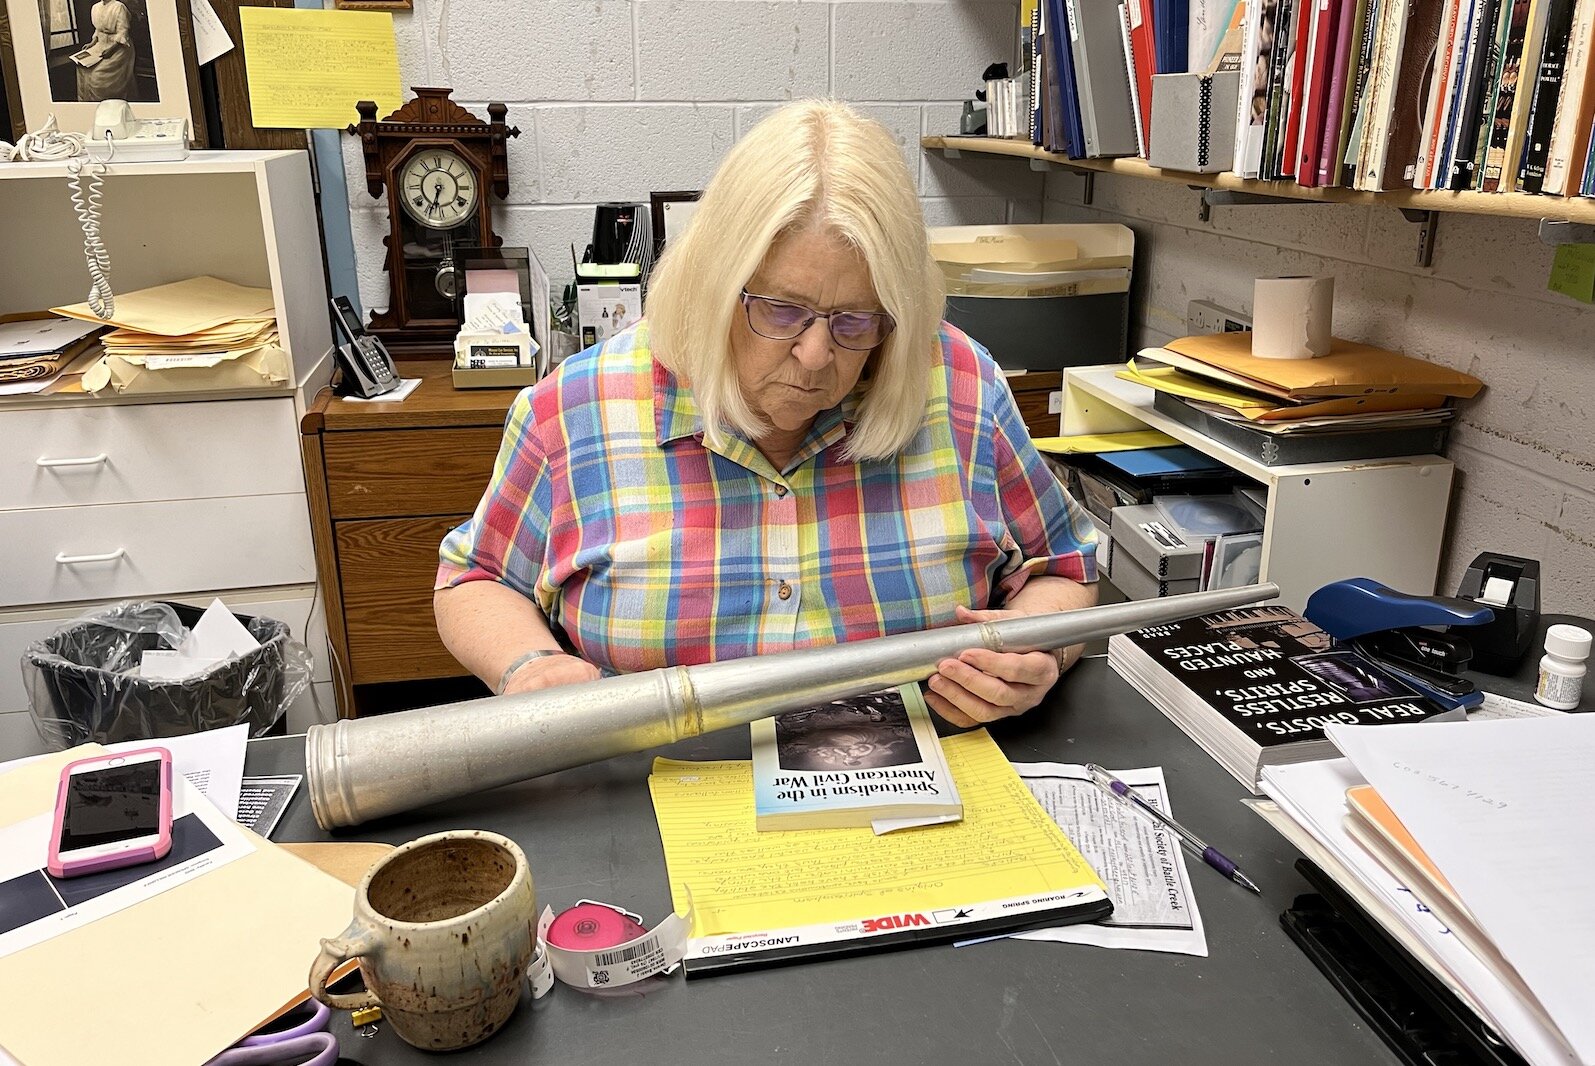 Jody Owens, a volunteer with the Battle Creek Historical Society, looks at a Spirit Trumpet that is part of the Historical Society's collection. Spirit trumpets were used to magnify the whispers of the spirits.